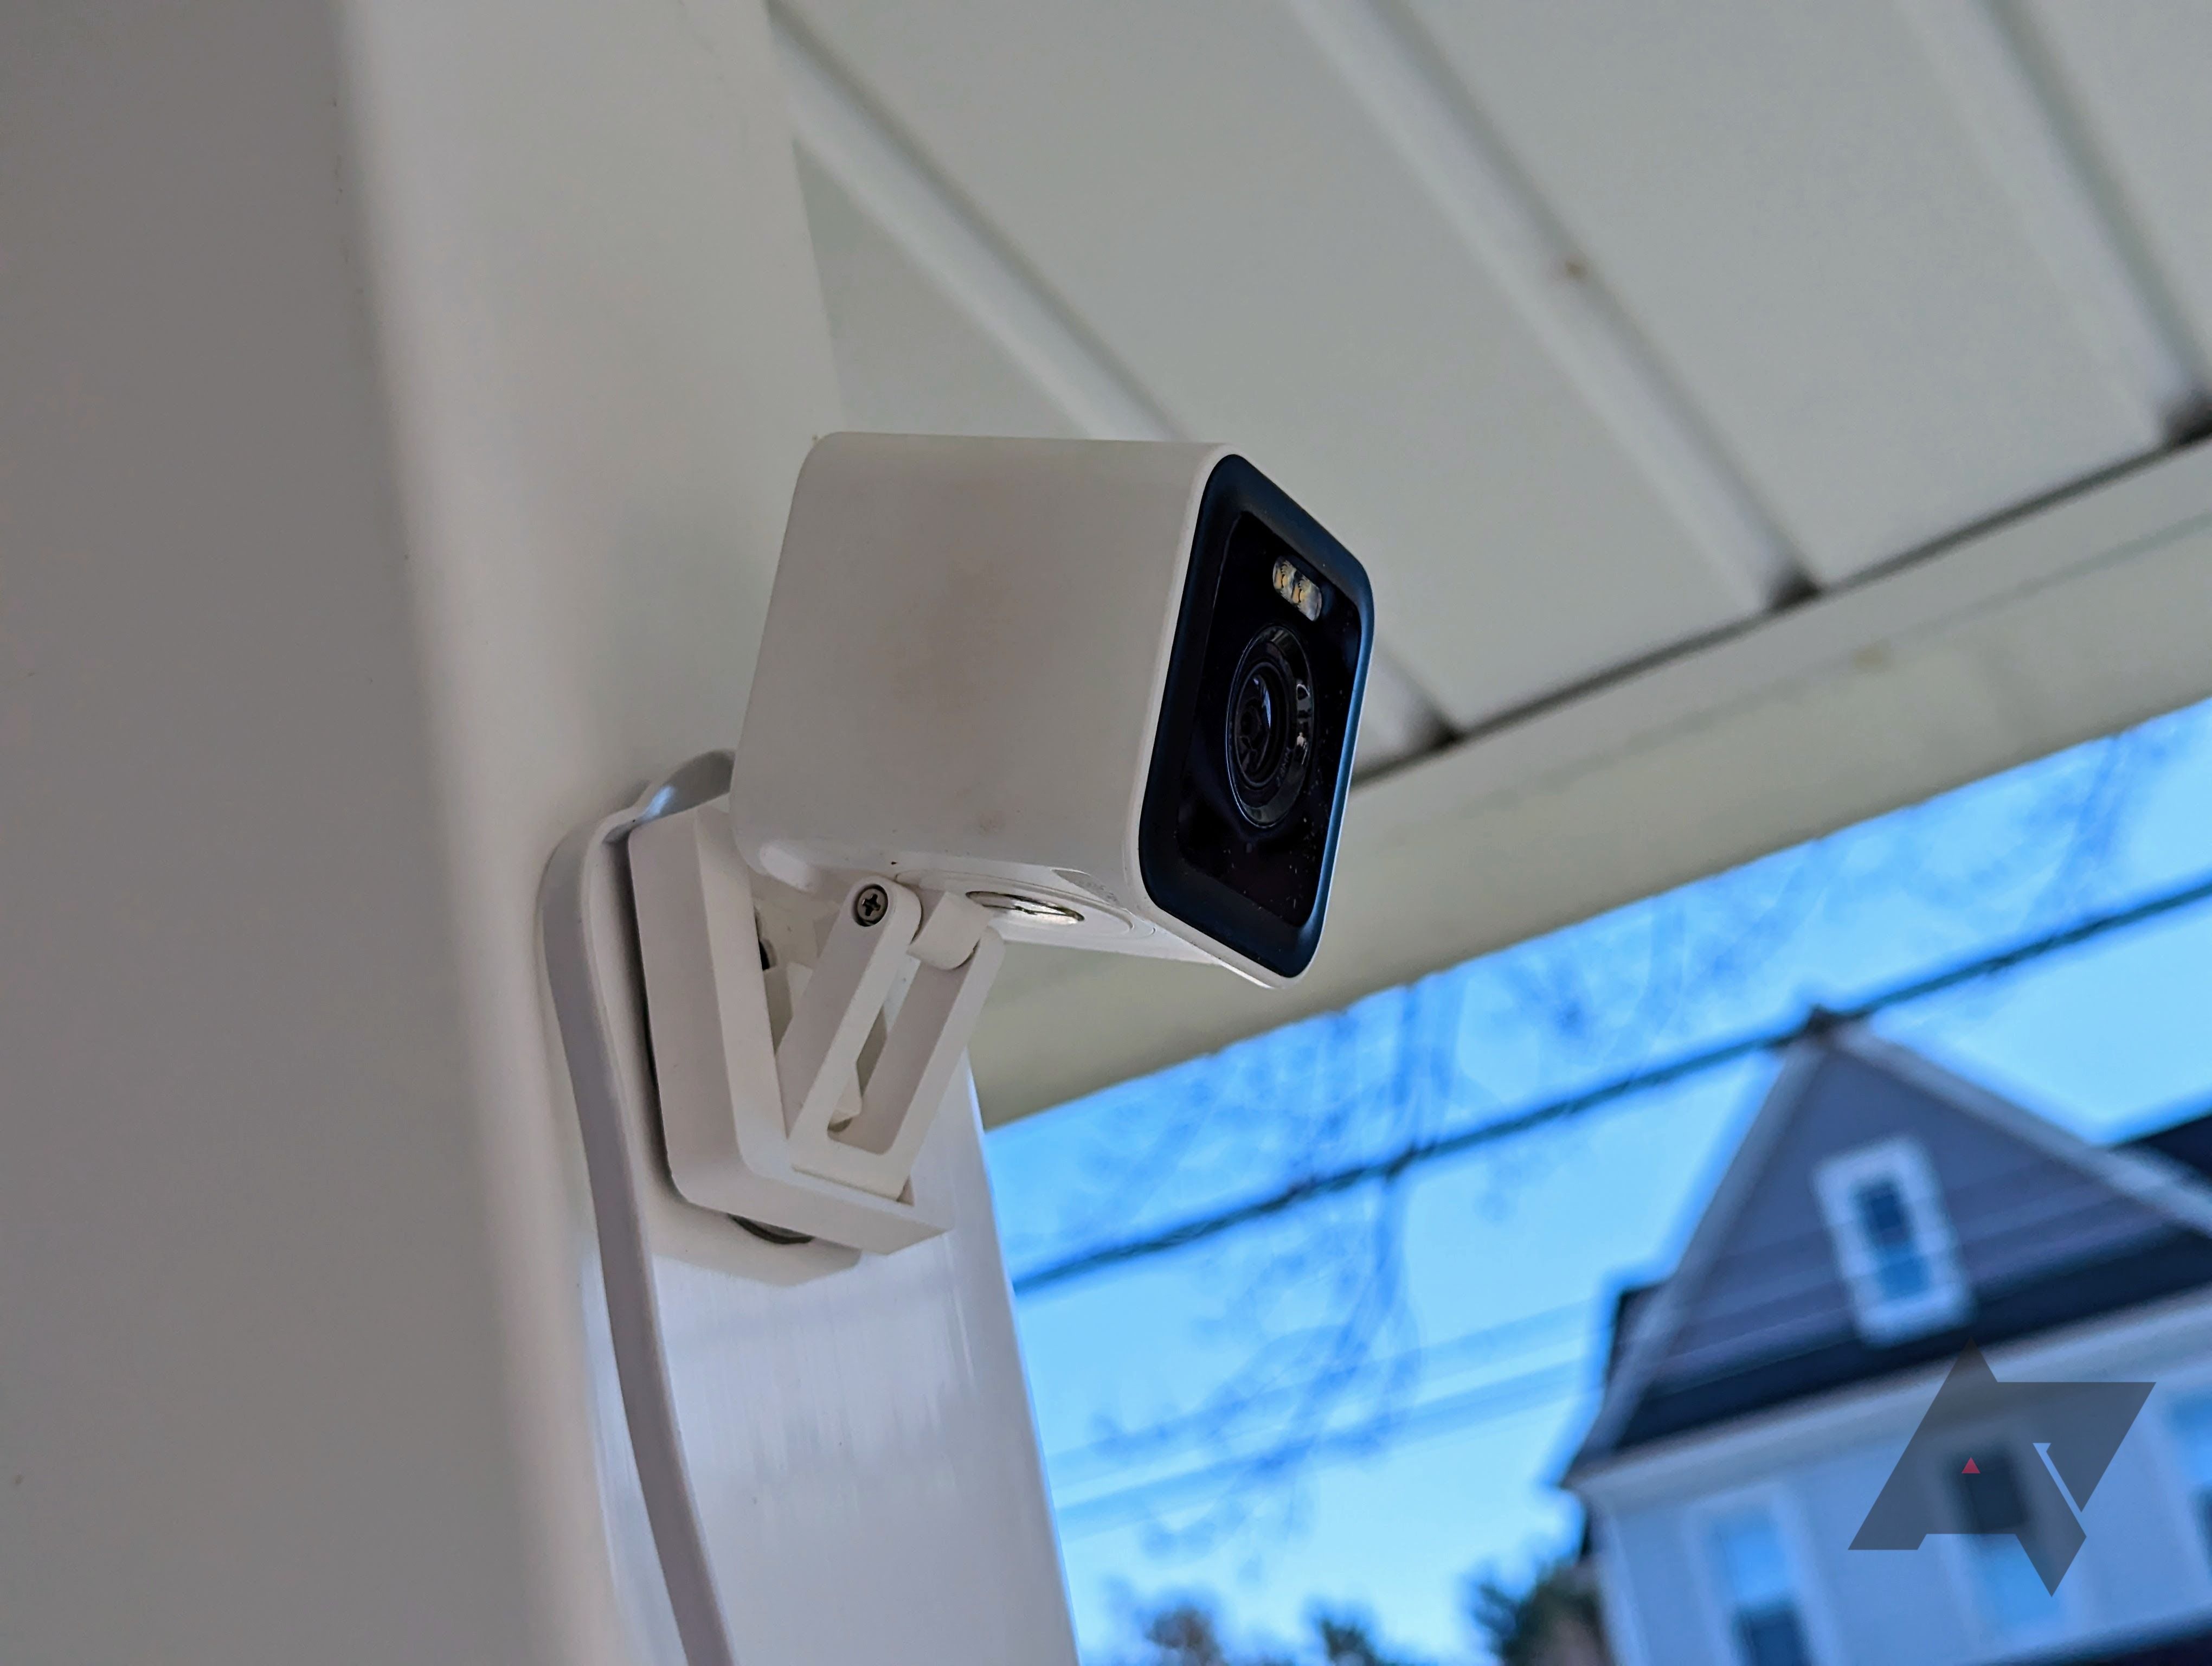 At over 50% off, the Wyze Cam v3 is a must-have smart home security essential